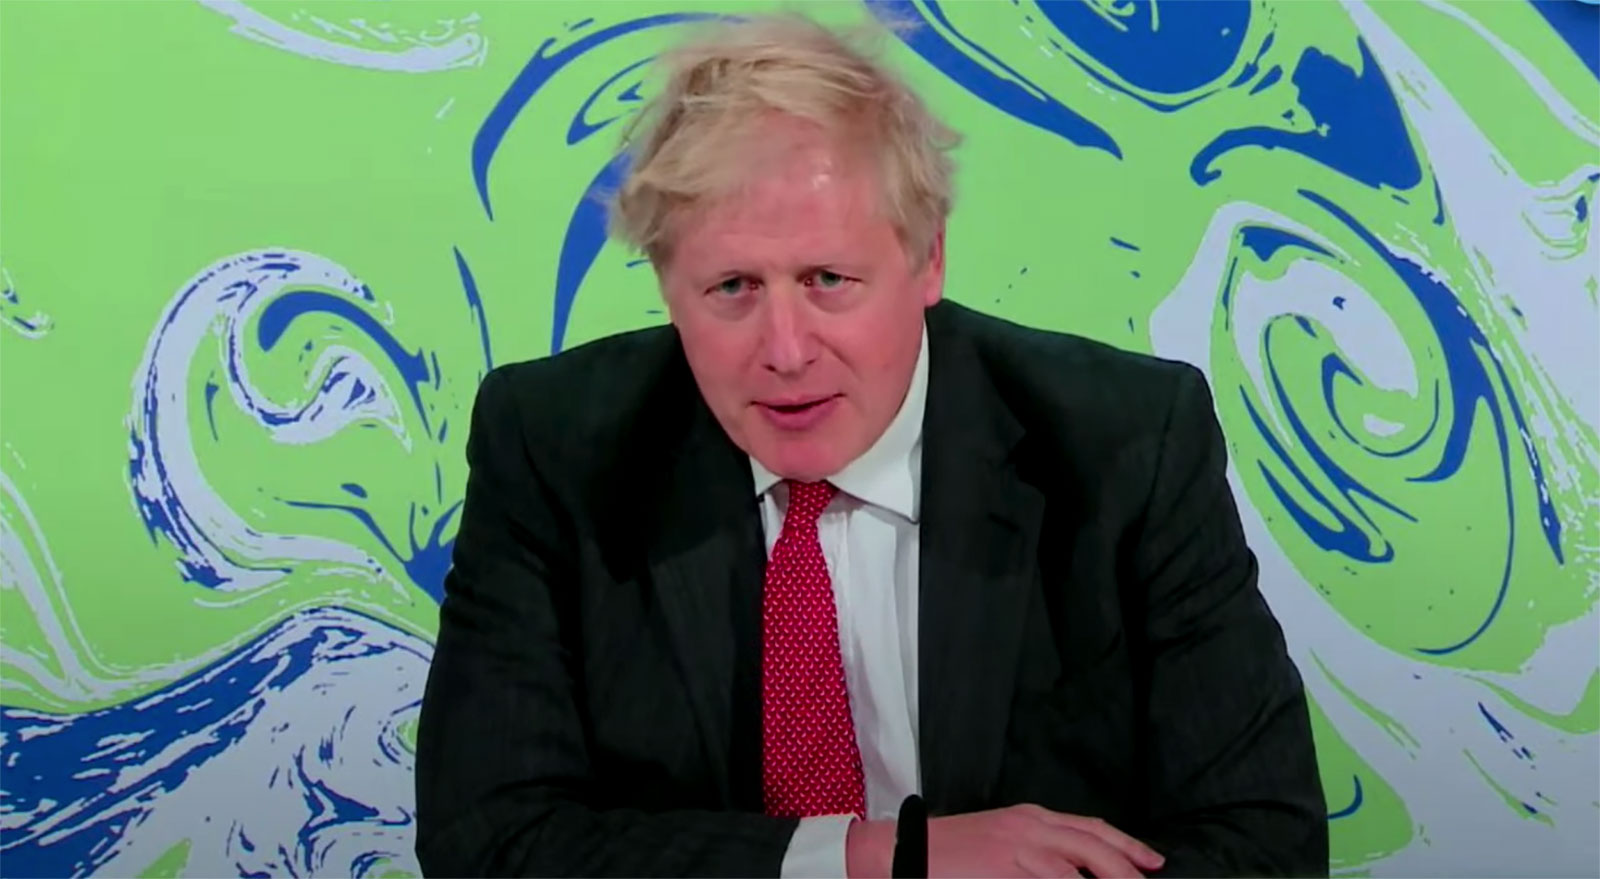 UK Prime Minister Boris Johnson speaks during the virtual Leaders Summit on Climate on Thursday. The UK government announced on Tuesday it is aiming to slash the country's emissions by 78% by 2035 compared to 1990 levels.